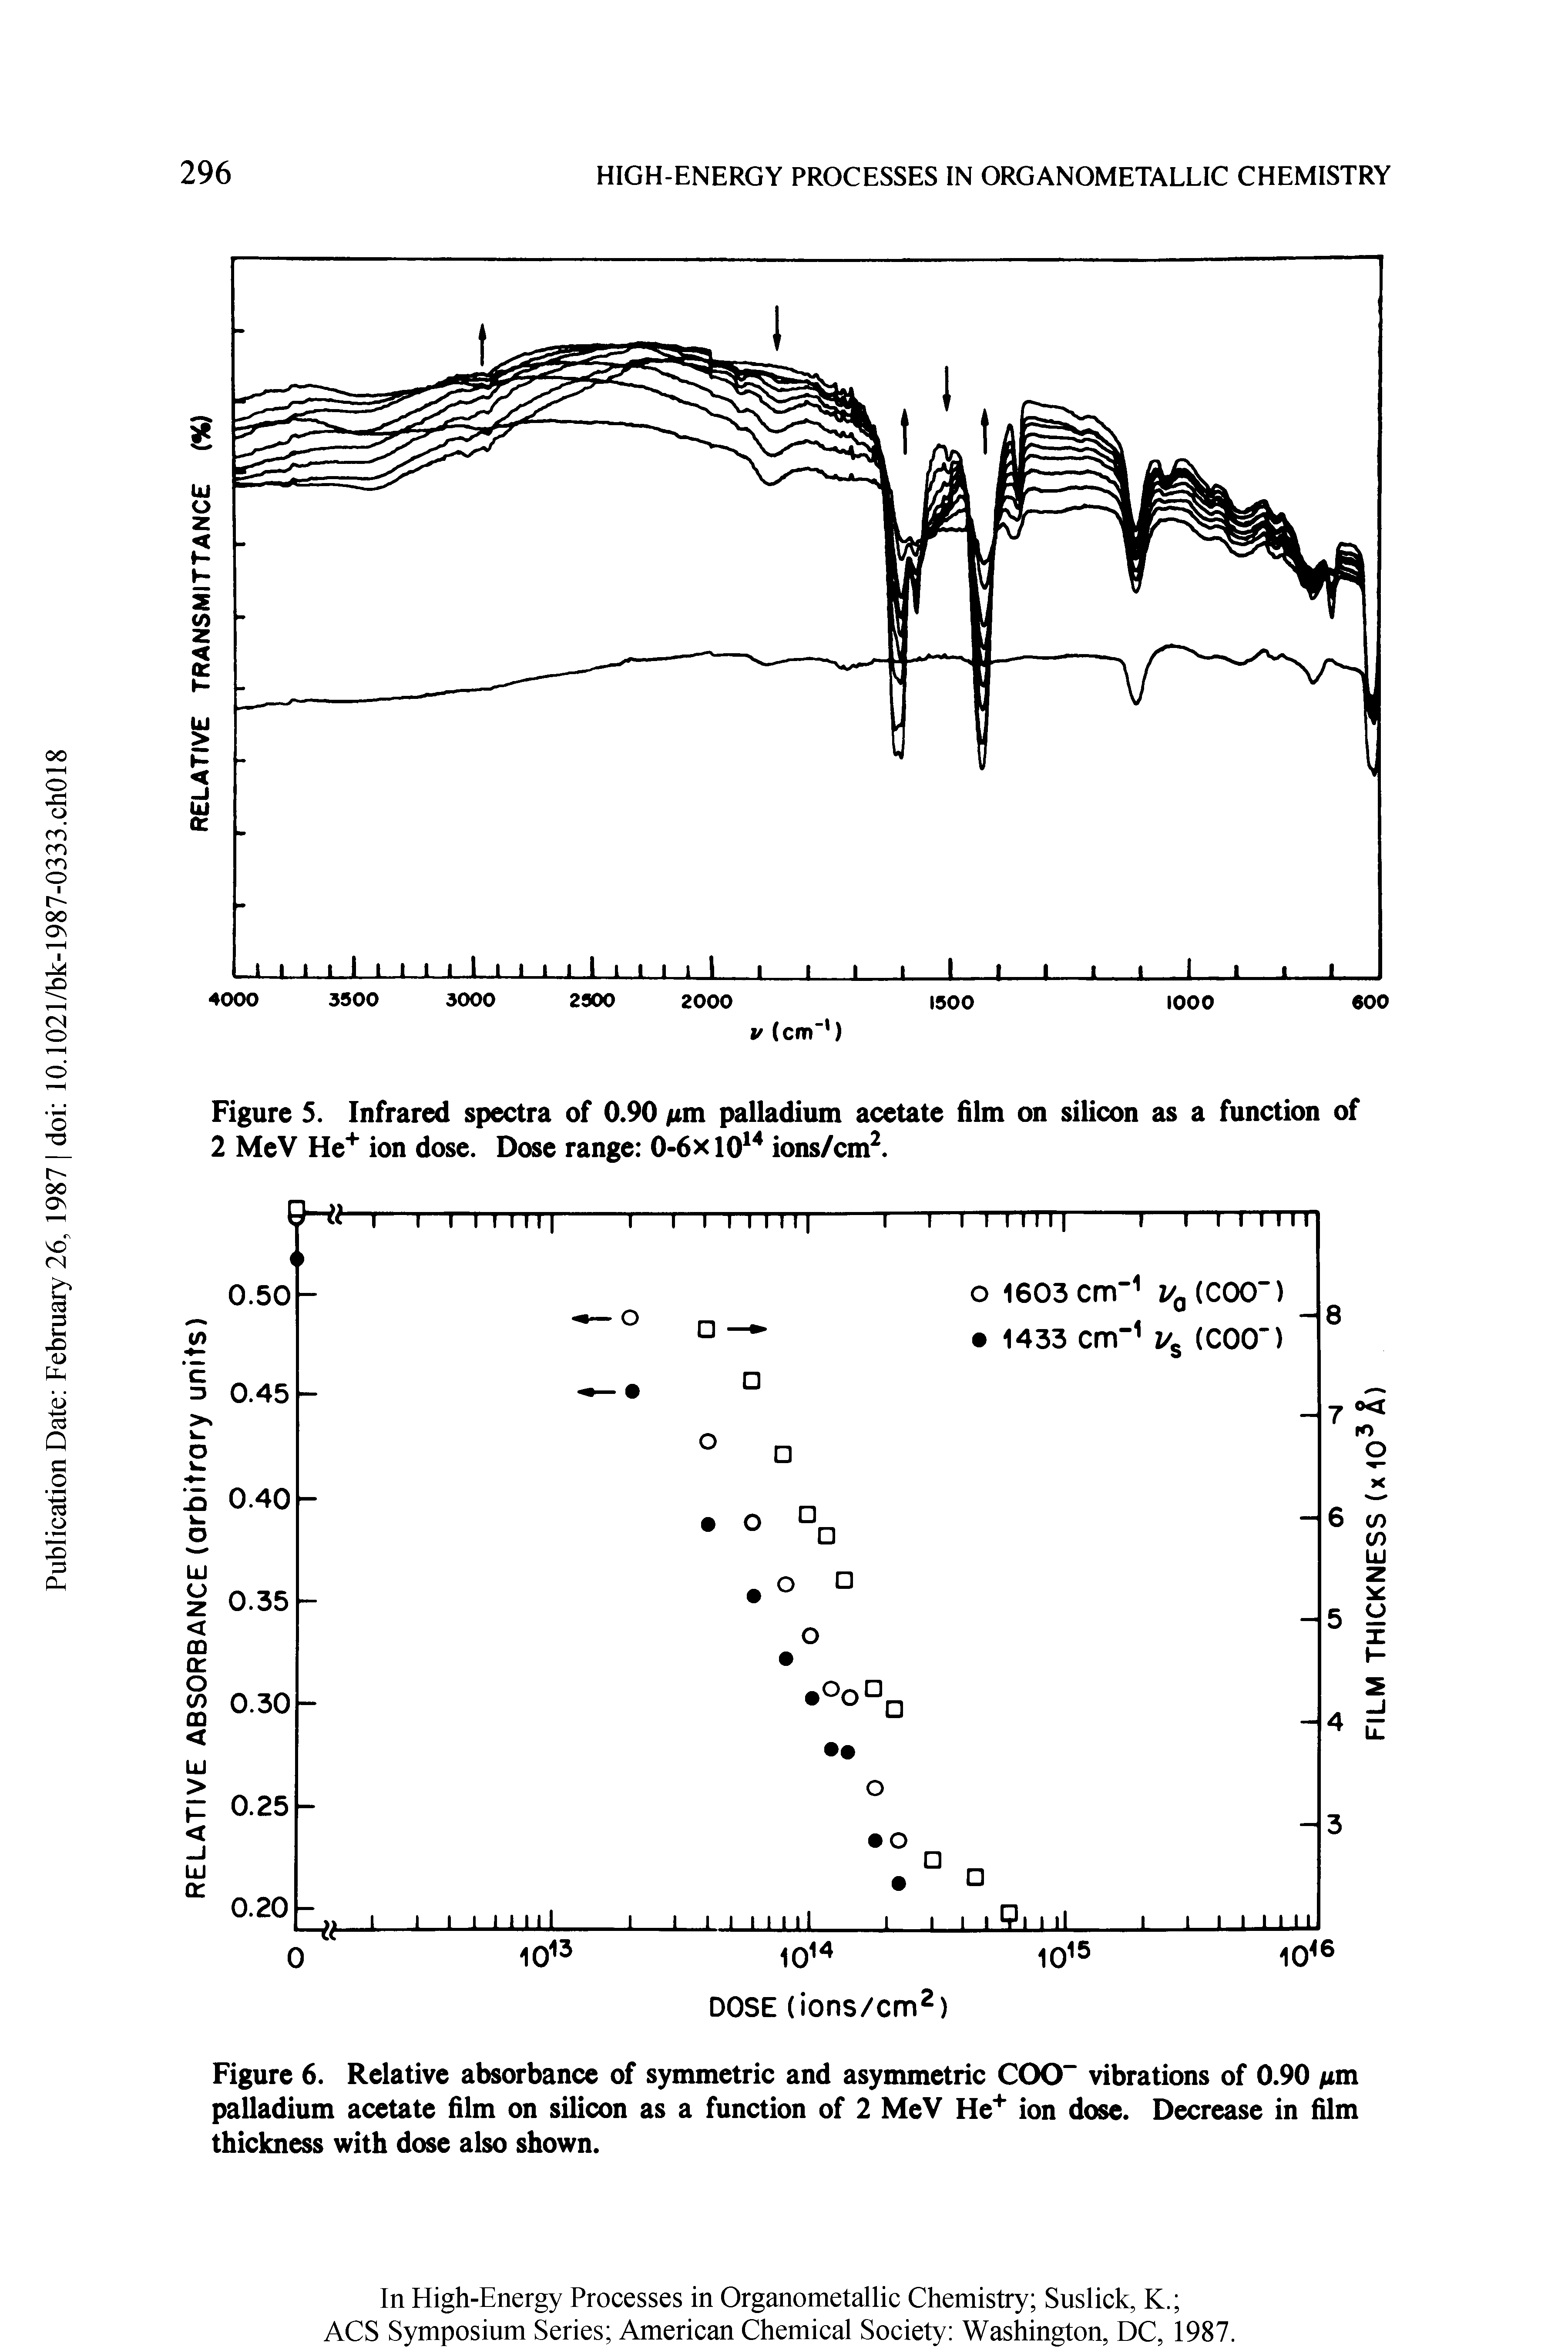 Figure 5. Infrared spectra of 0.90 nm palladium acetate film on silicon as a function of 2 MeV He+ ion dose. Dose range 0-6x 1014 ions/cm2.